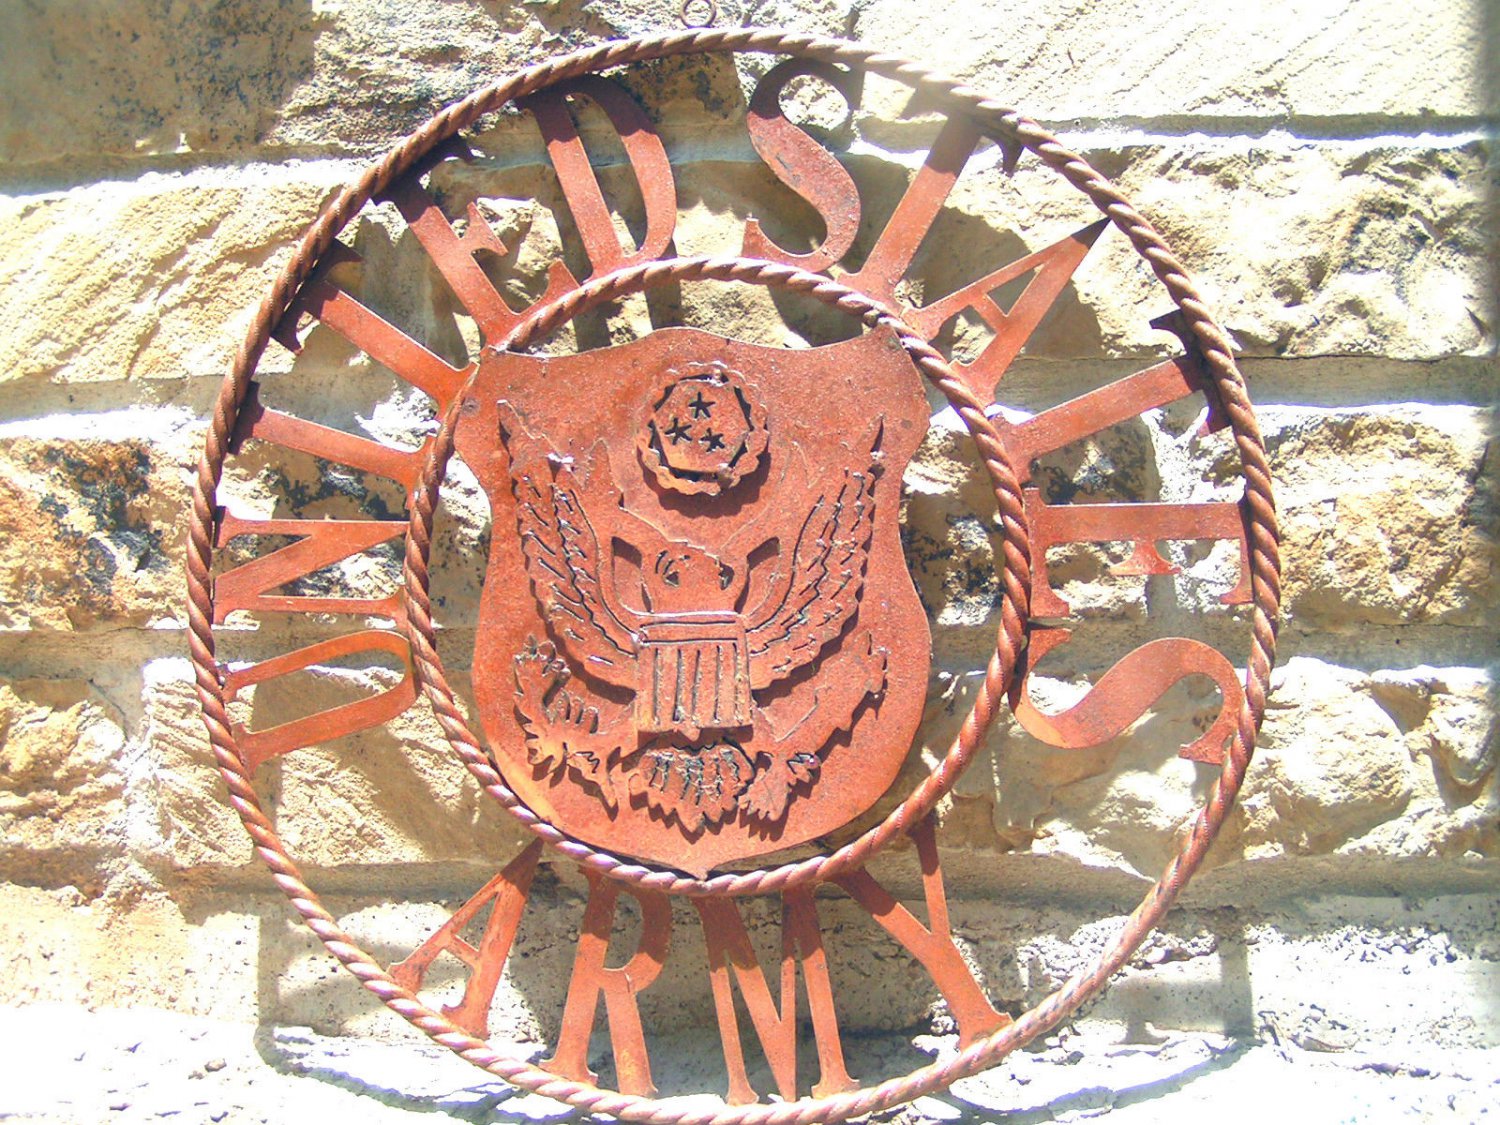 United States ARMY Sign Plasma Metal Art 22 inches 0629